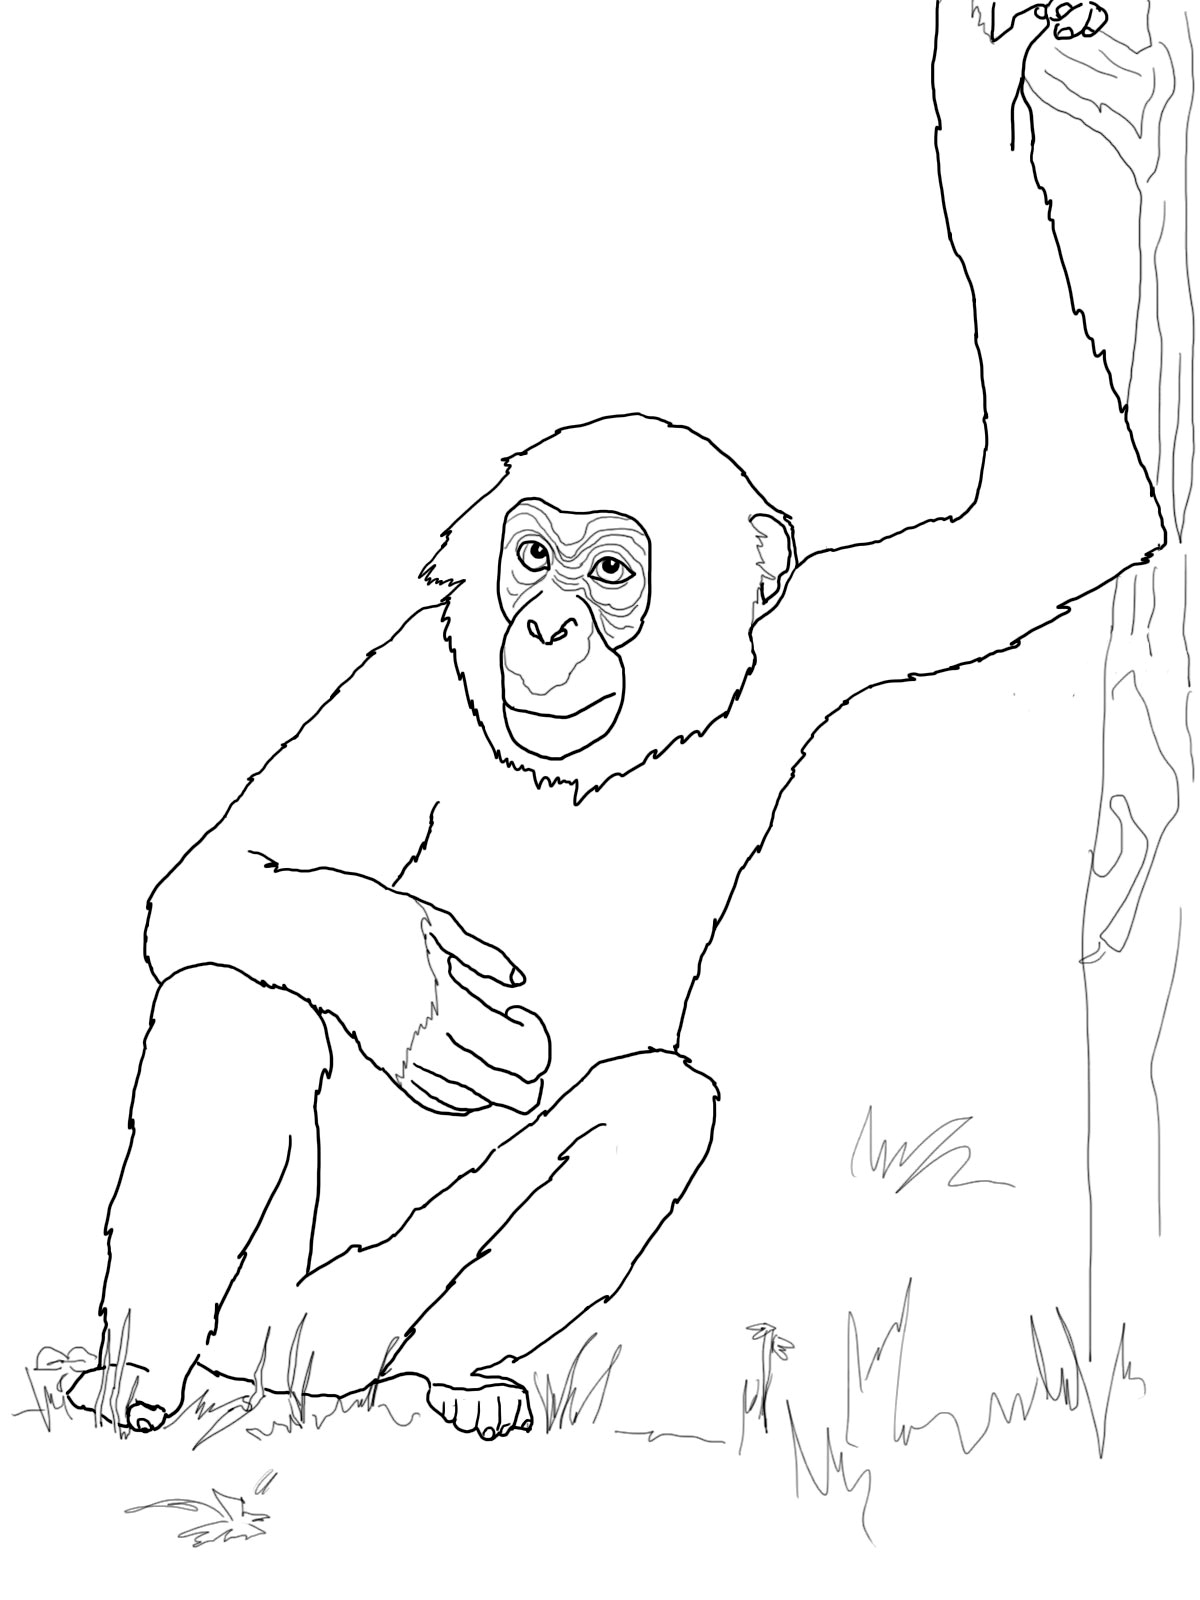 Chimpanzee Coloring Pages Free Printable Chimpanzee Coloring Pages For Kids